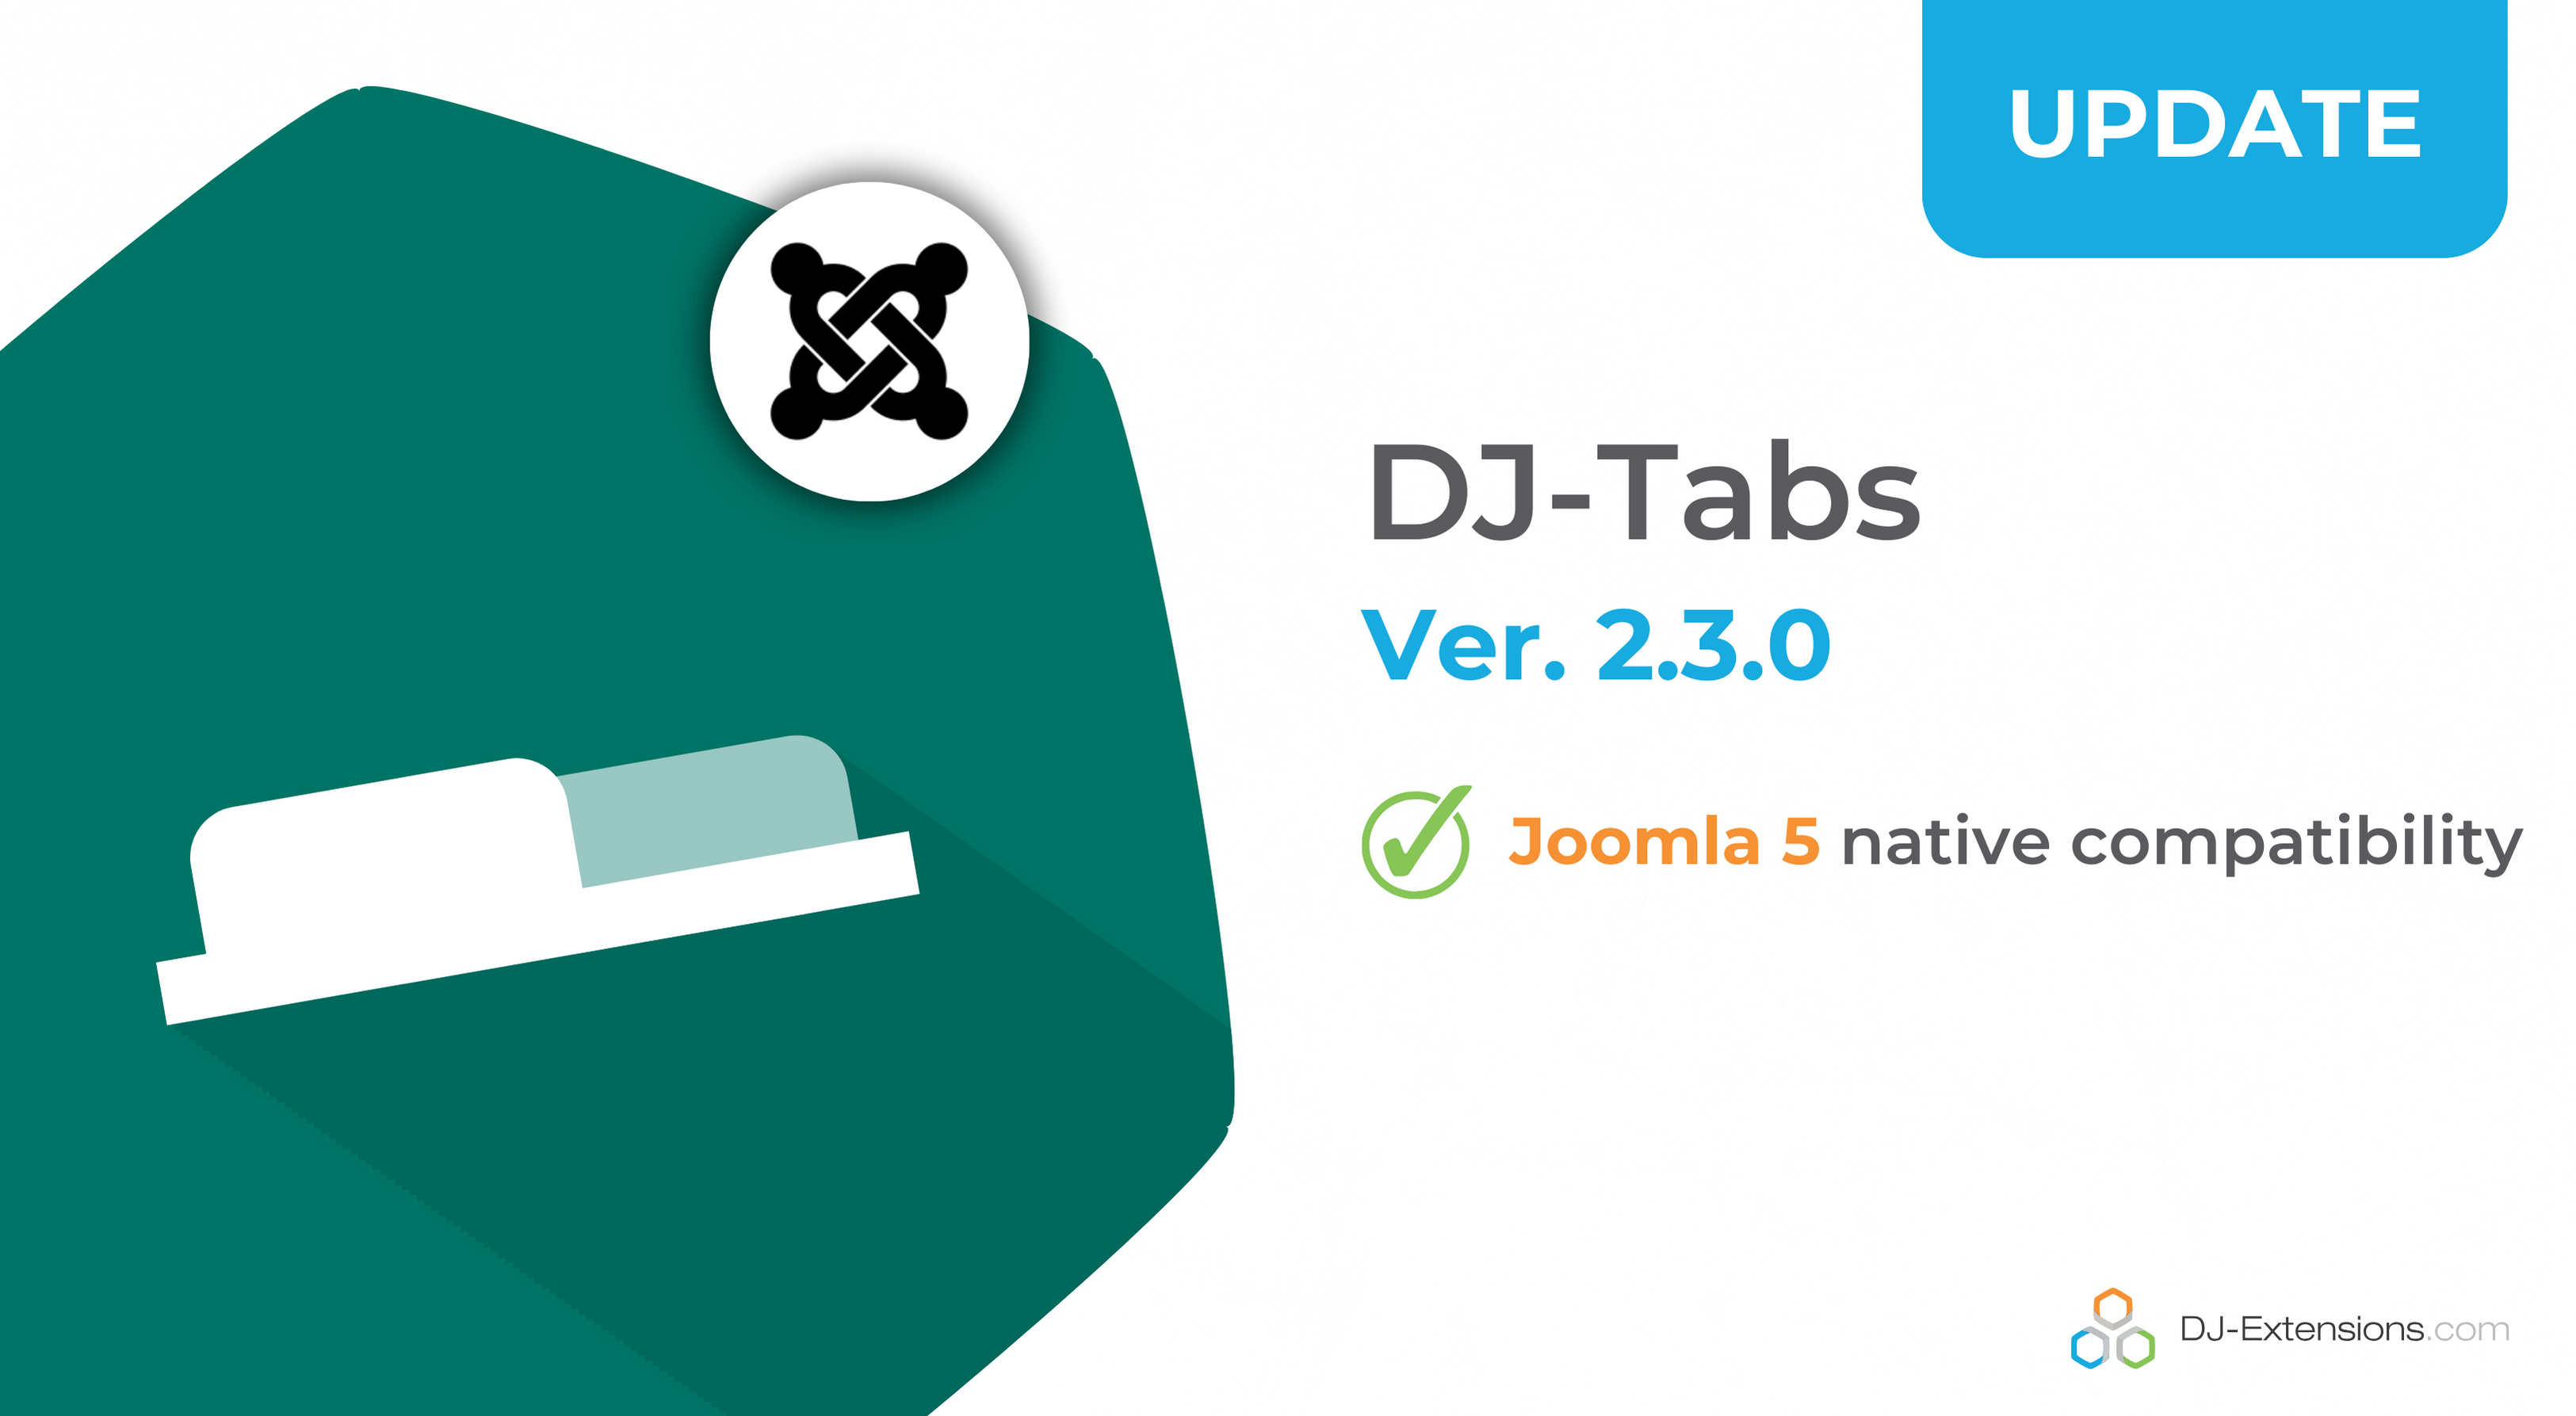 Get ready to elevate your Joomla 5 experience with DJ-Tabs extension